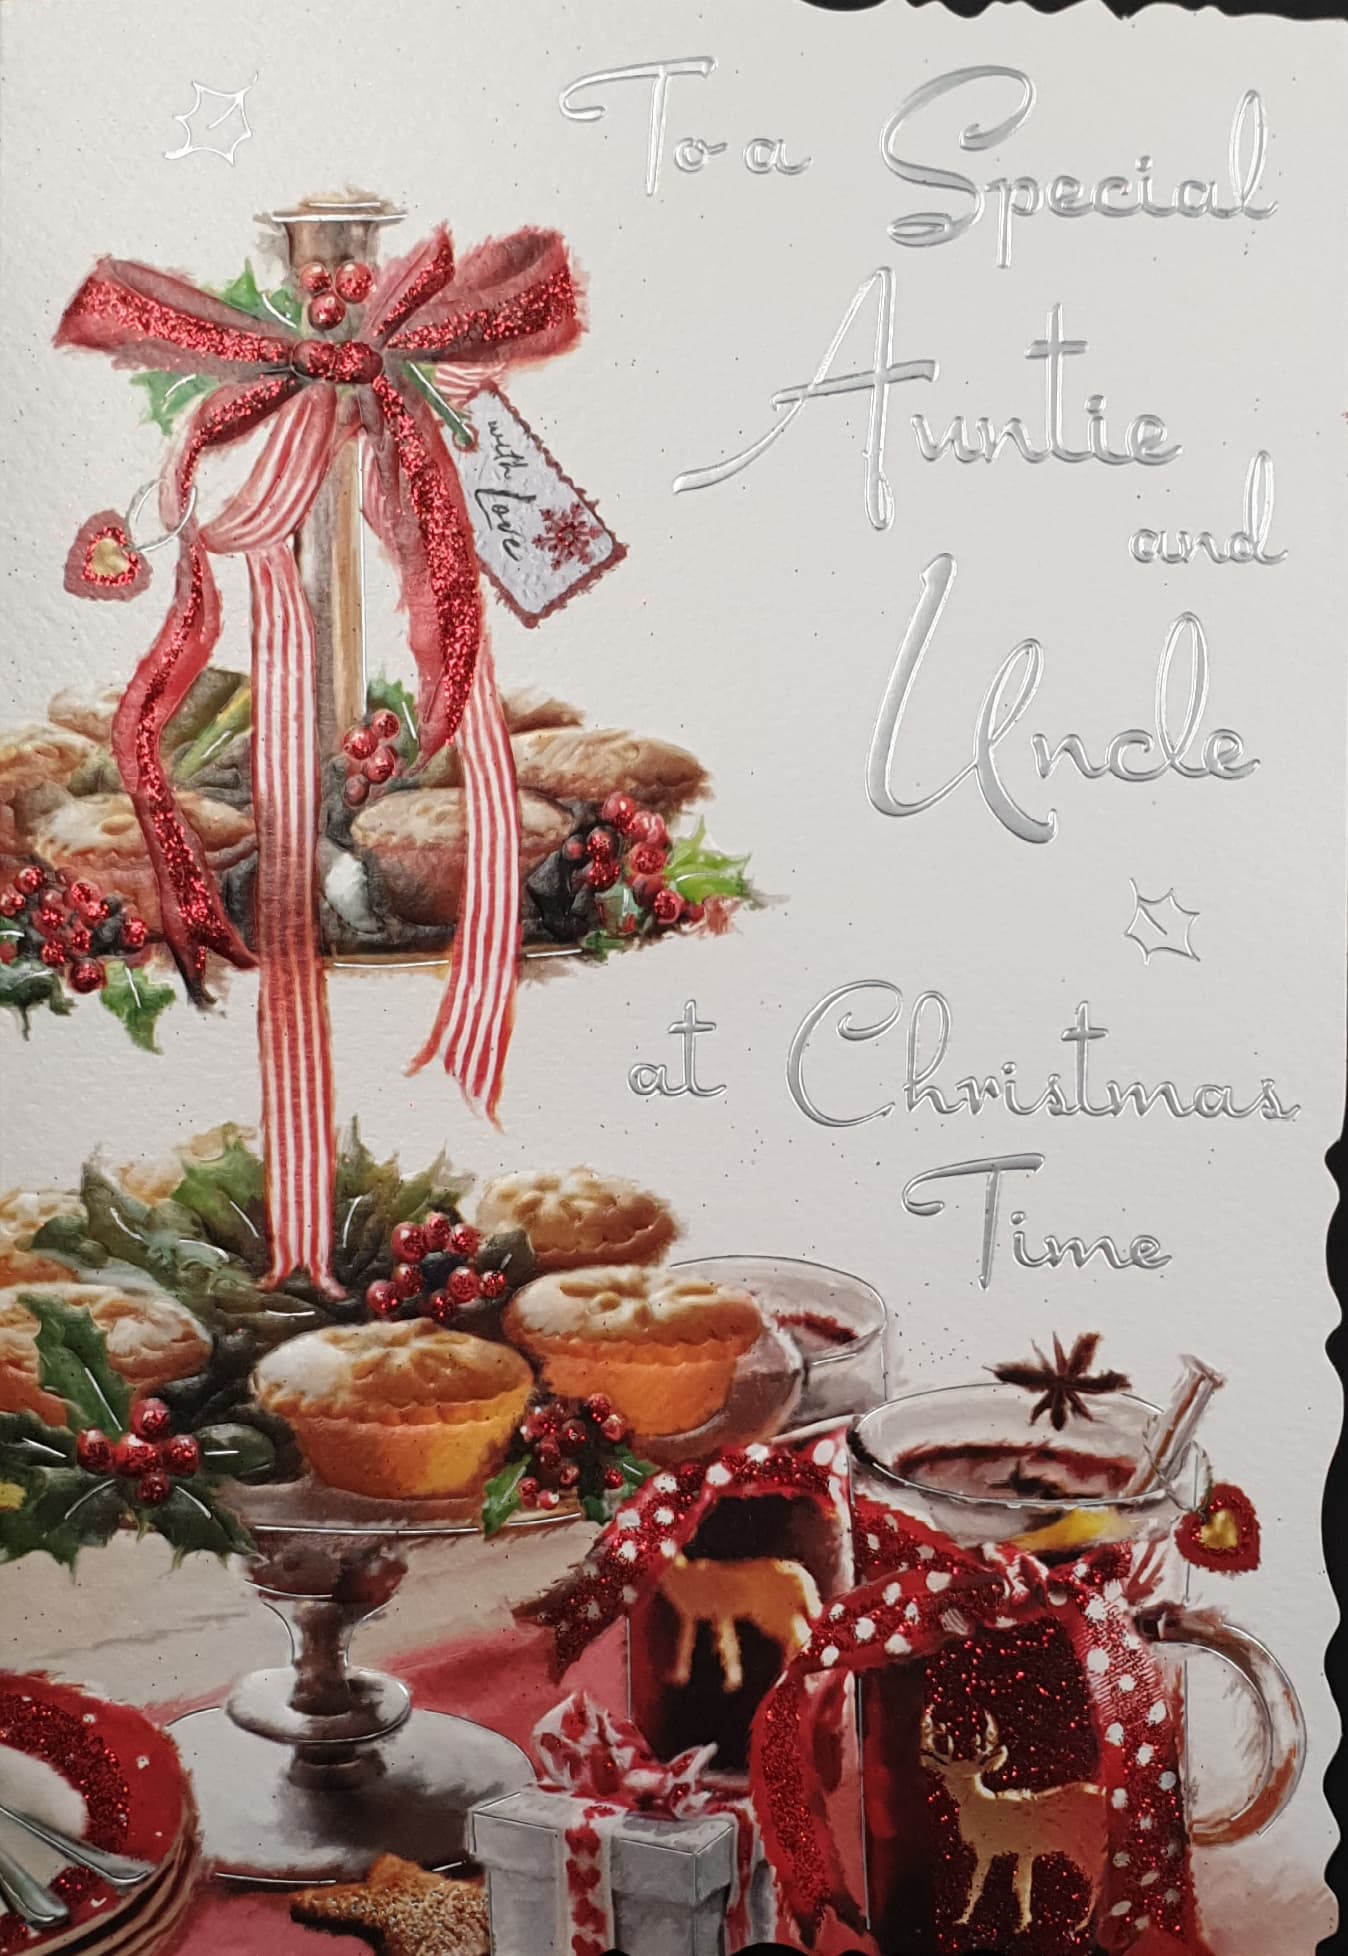 Auntie and Uncle Christmas Card - Decorated Mince Pies & Mulled Wine